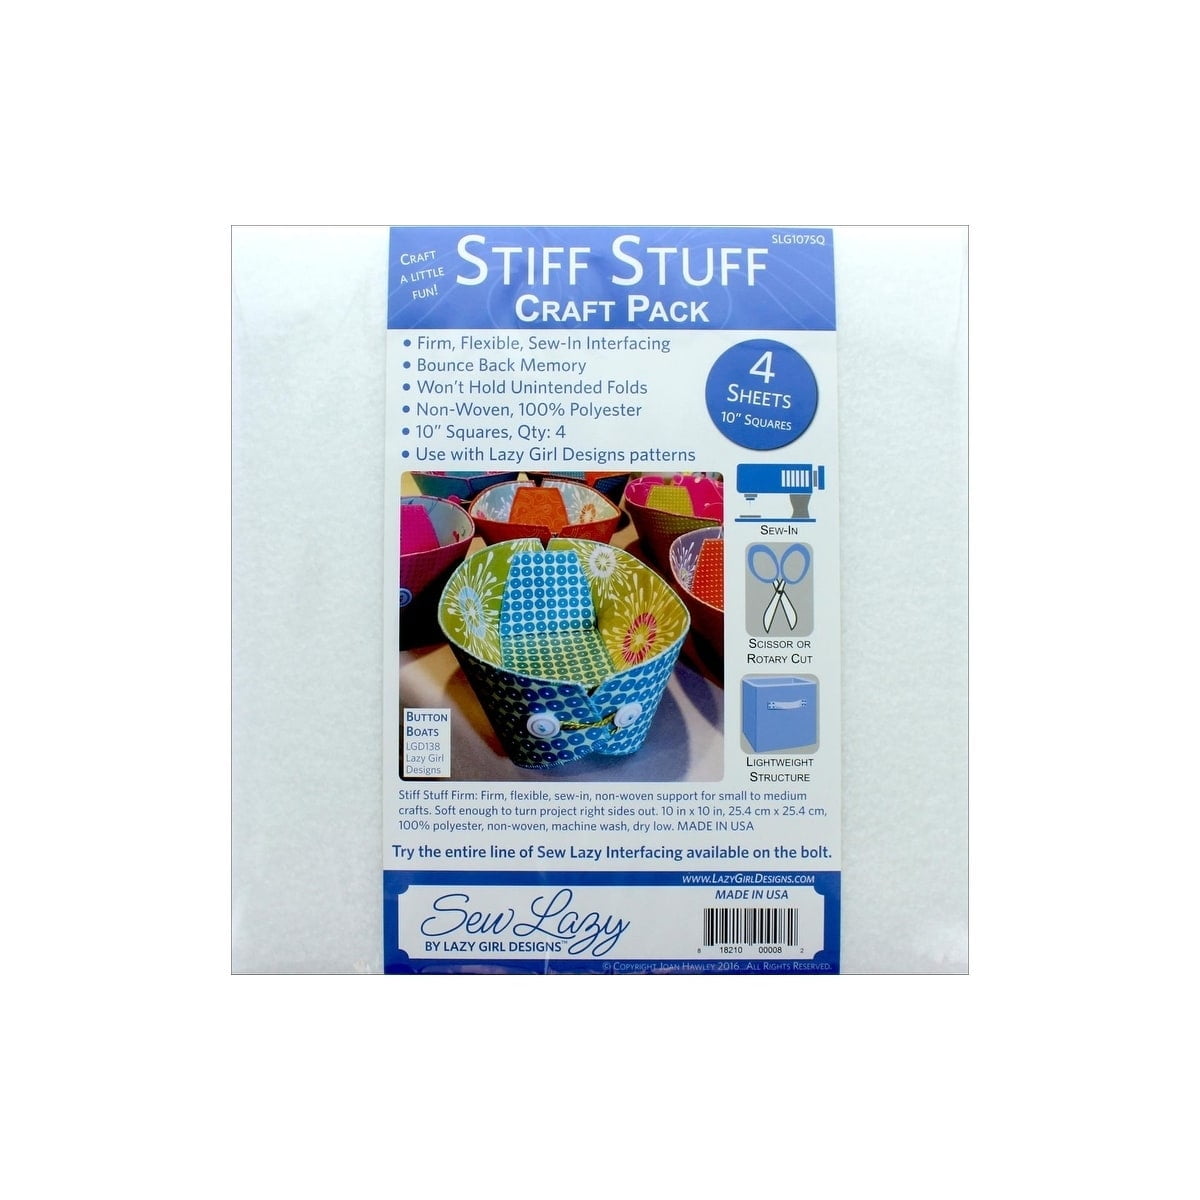 Face It Soft Fusible Interfacing by Lazy Girl Designs